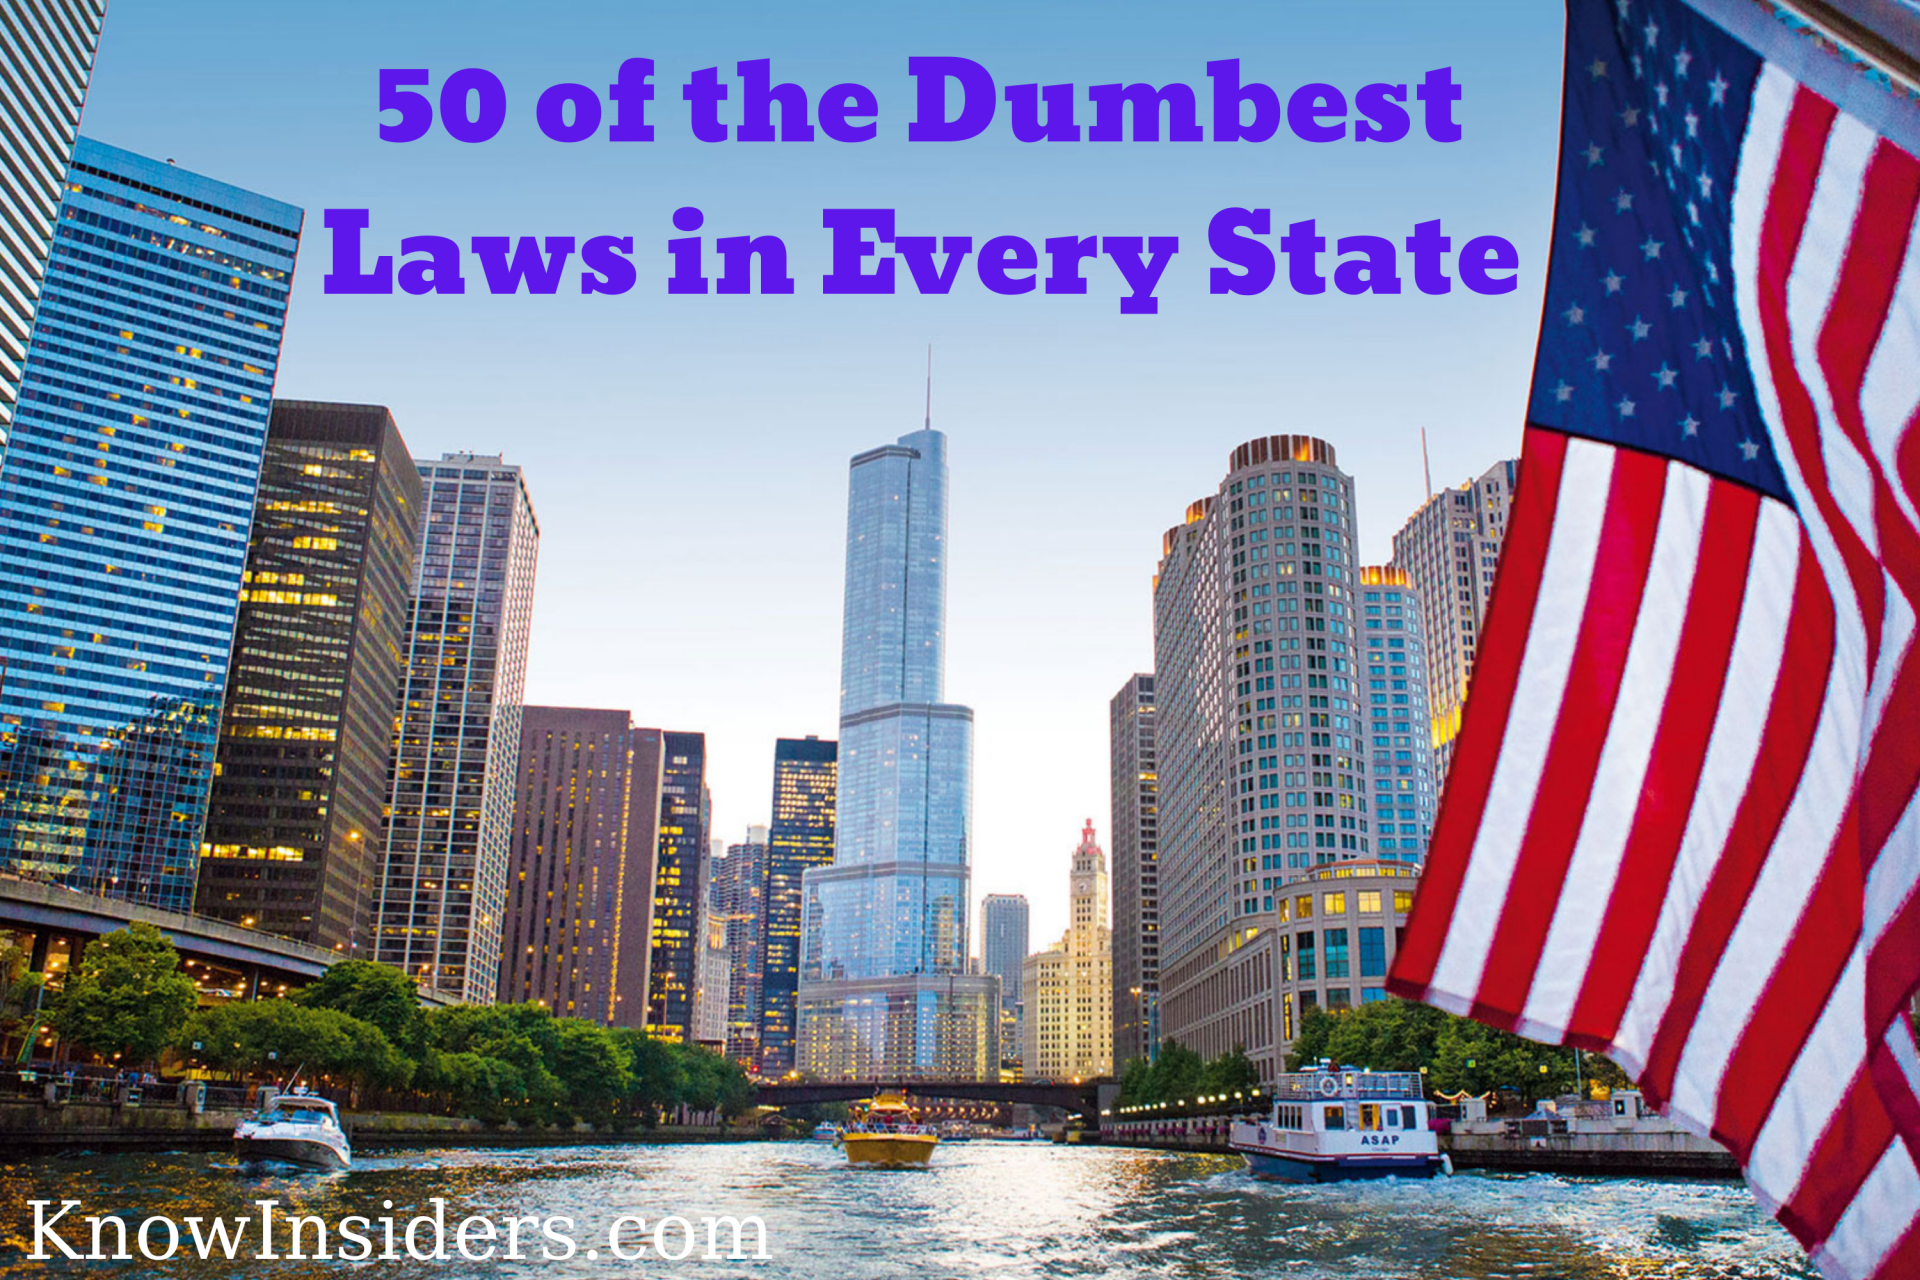 50 of the Dumbest Laws for Every State in America